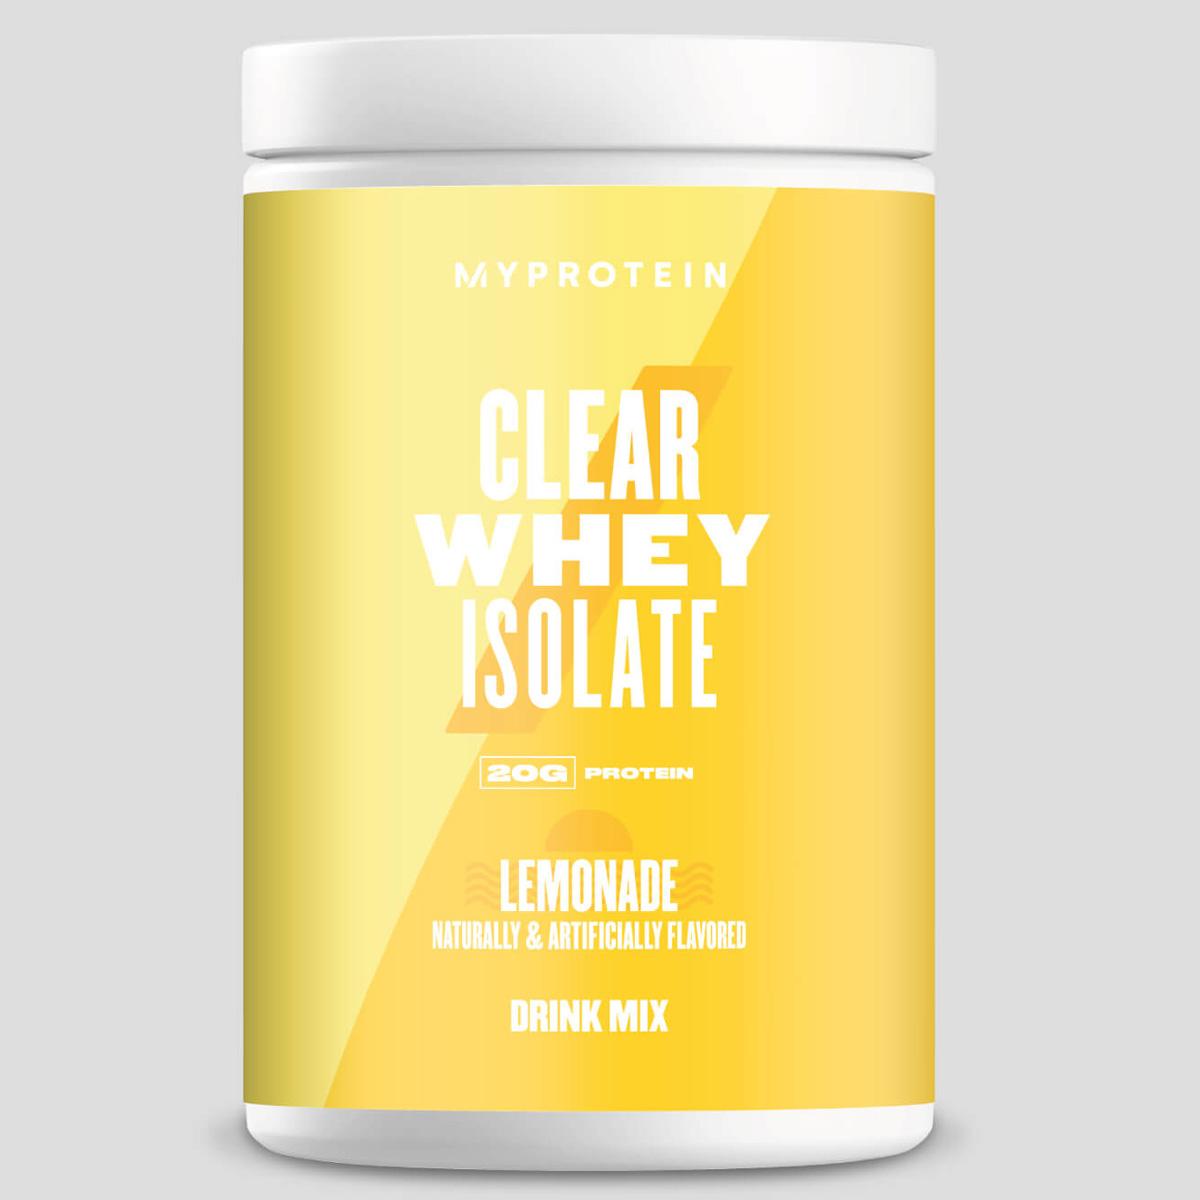 2 Myprotein Clear Whey Isolate for $20 Shipped